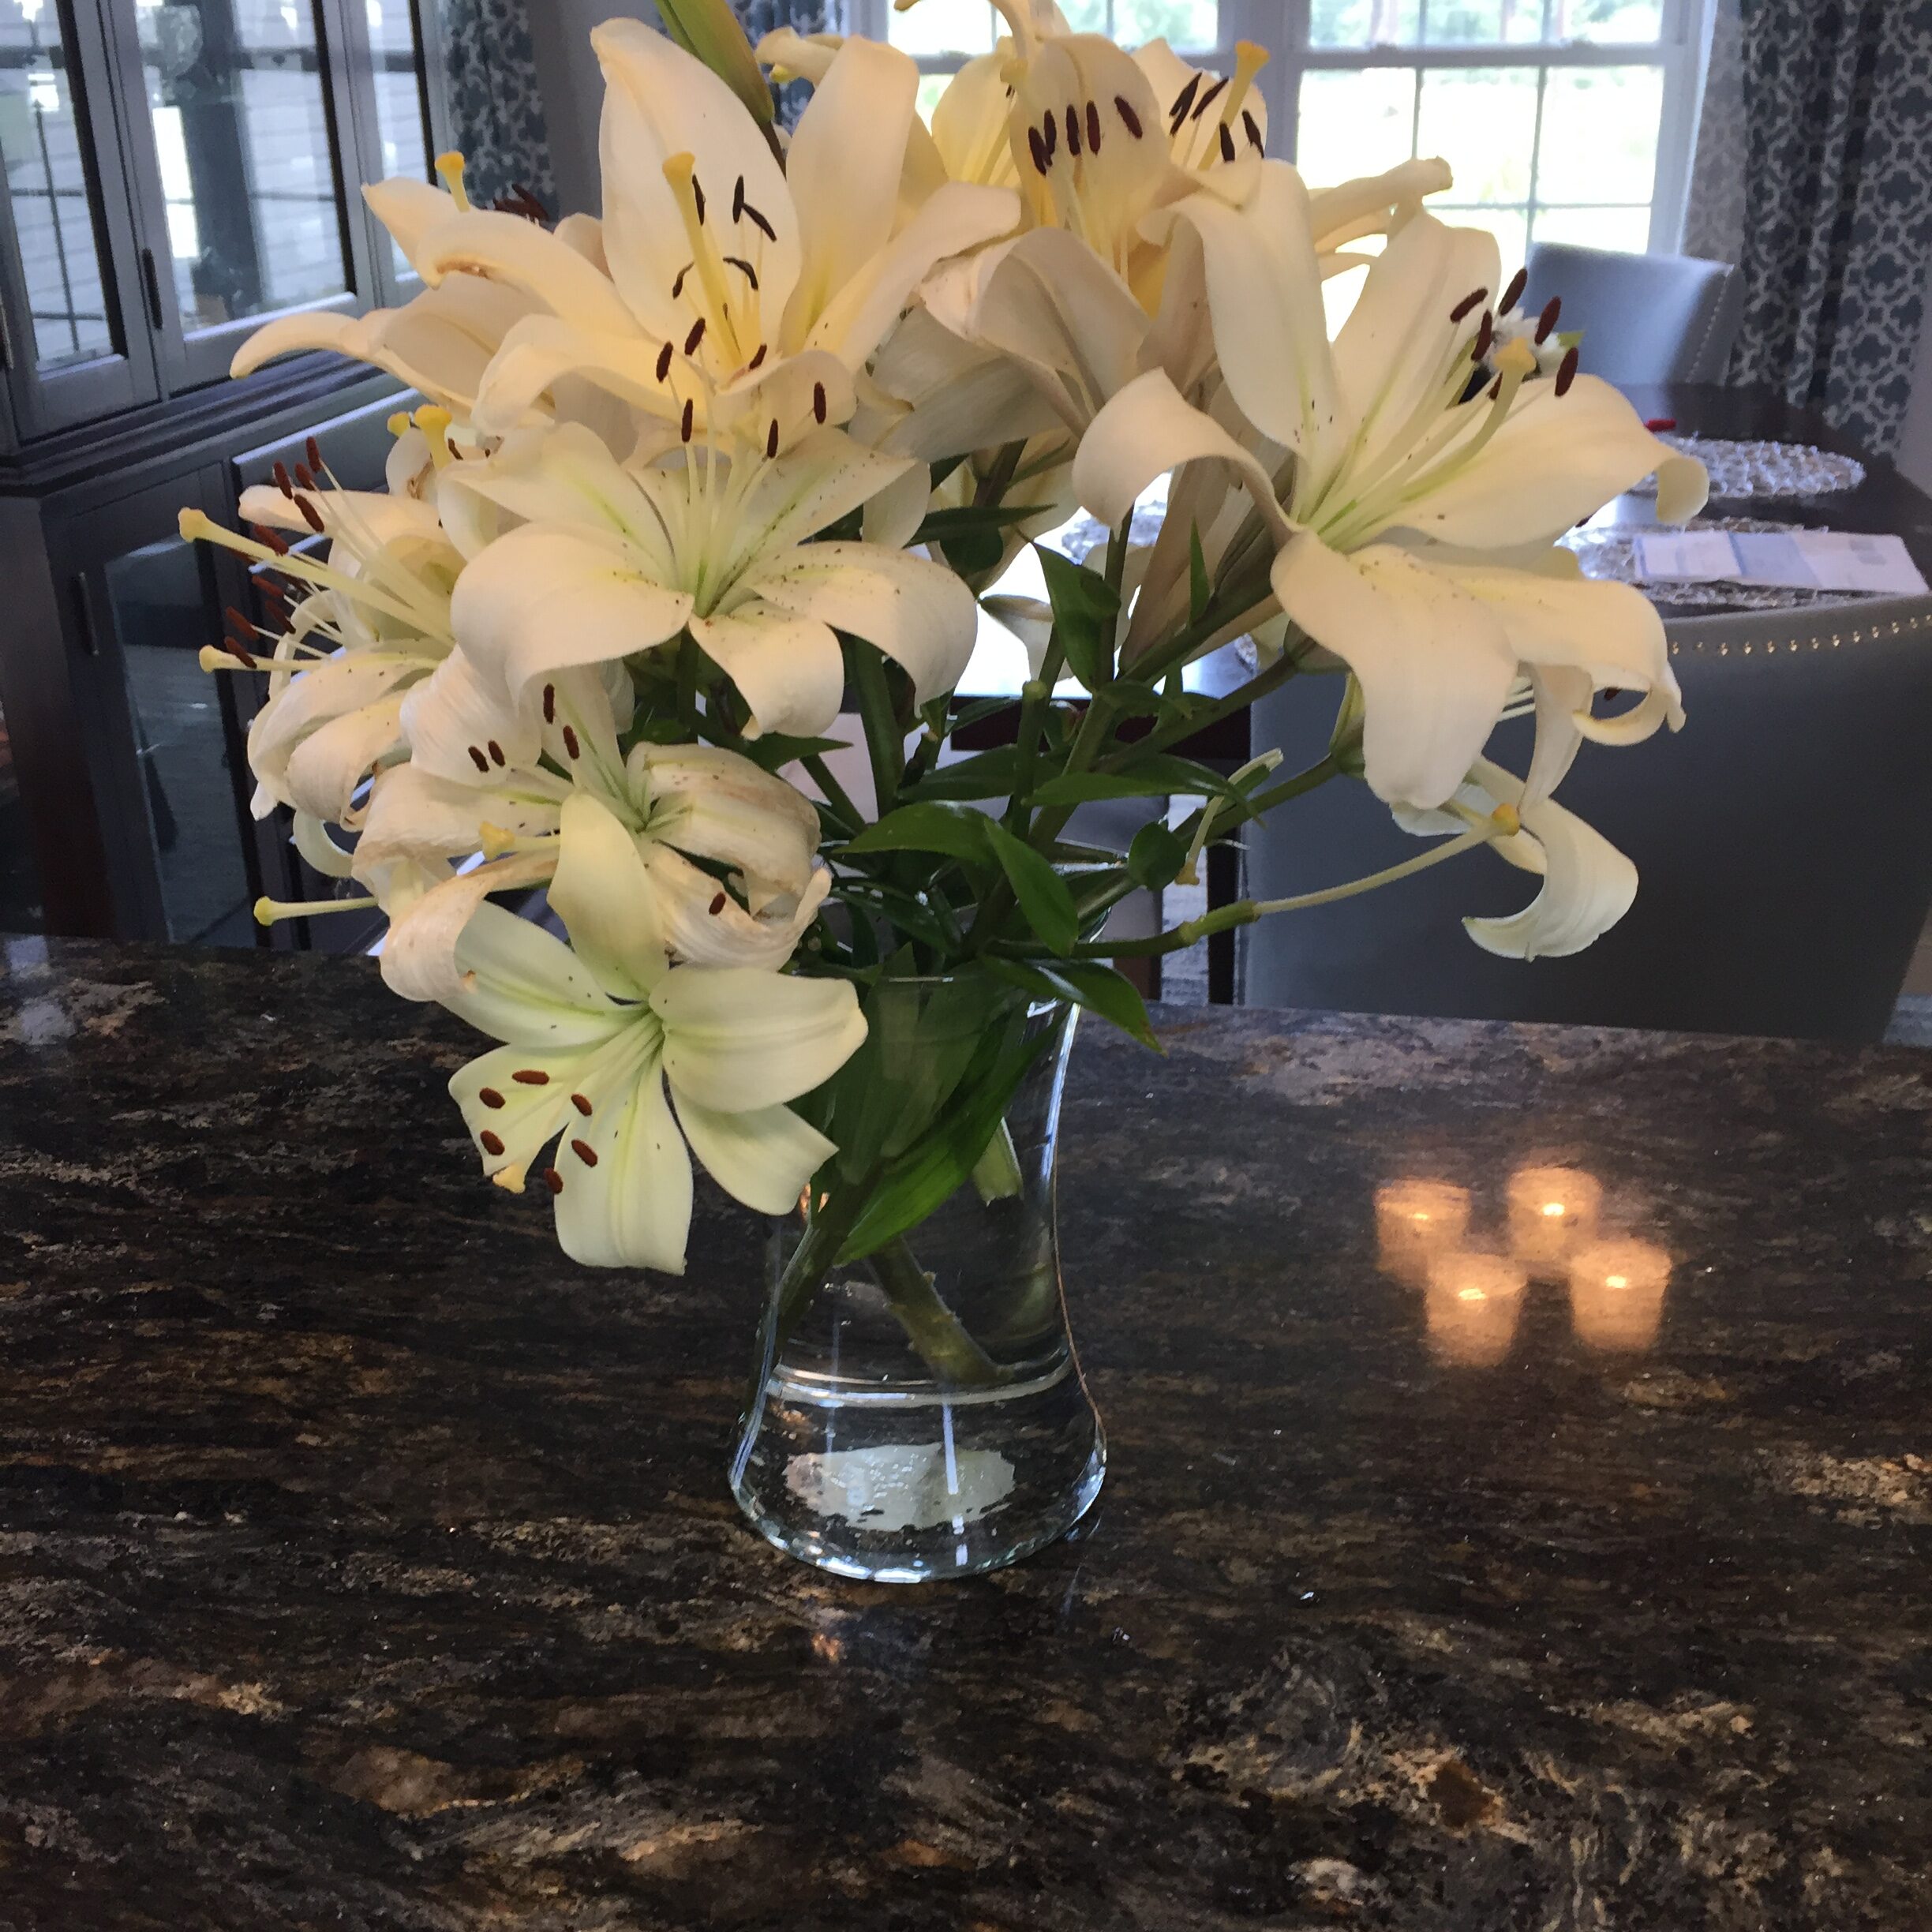 My white asiatic lilies in a vase